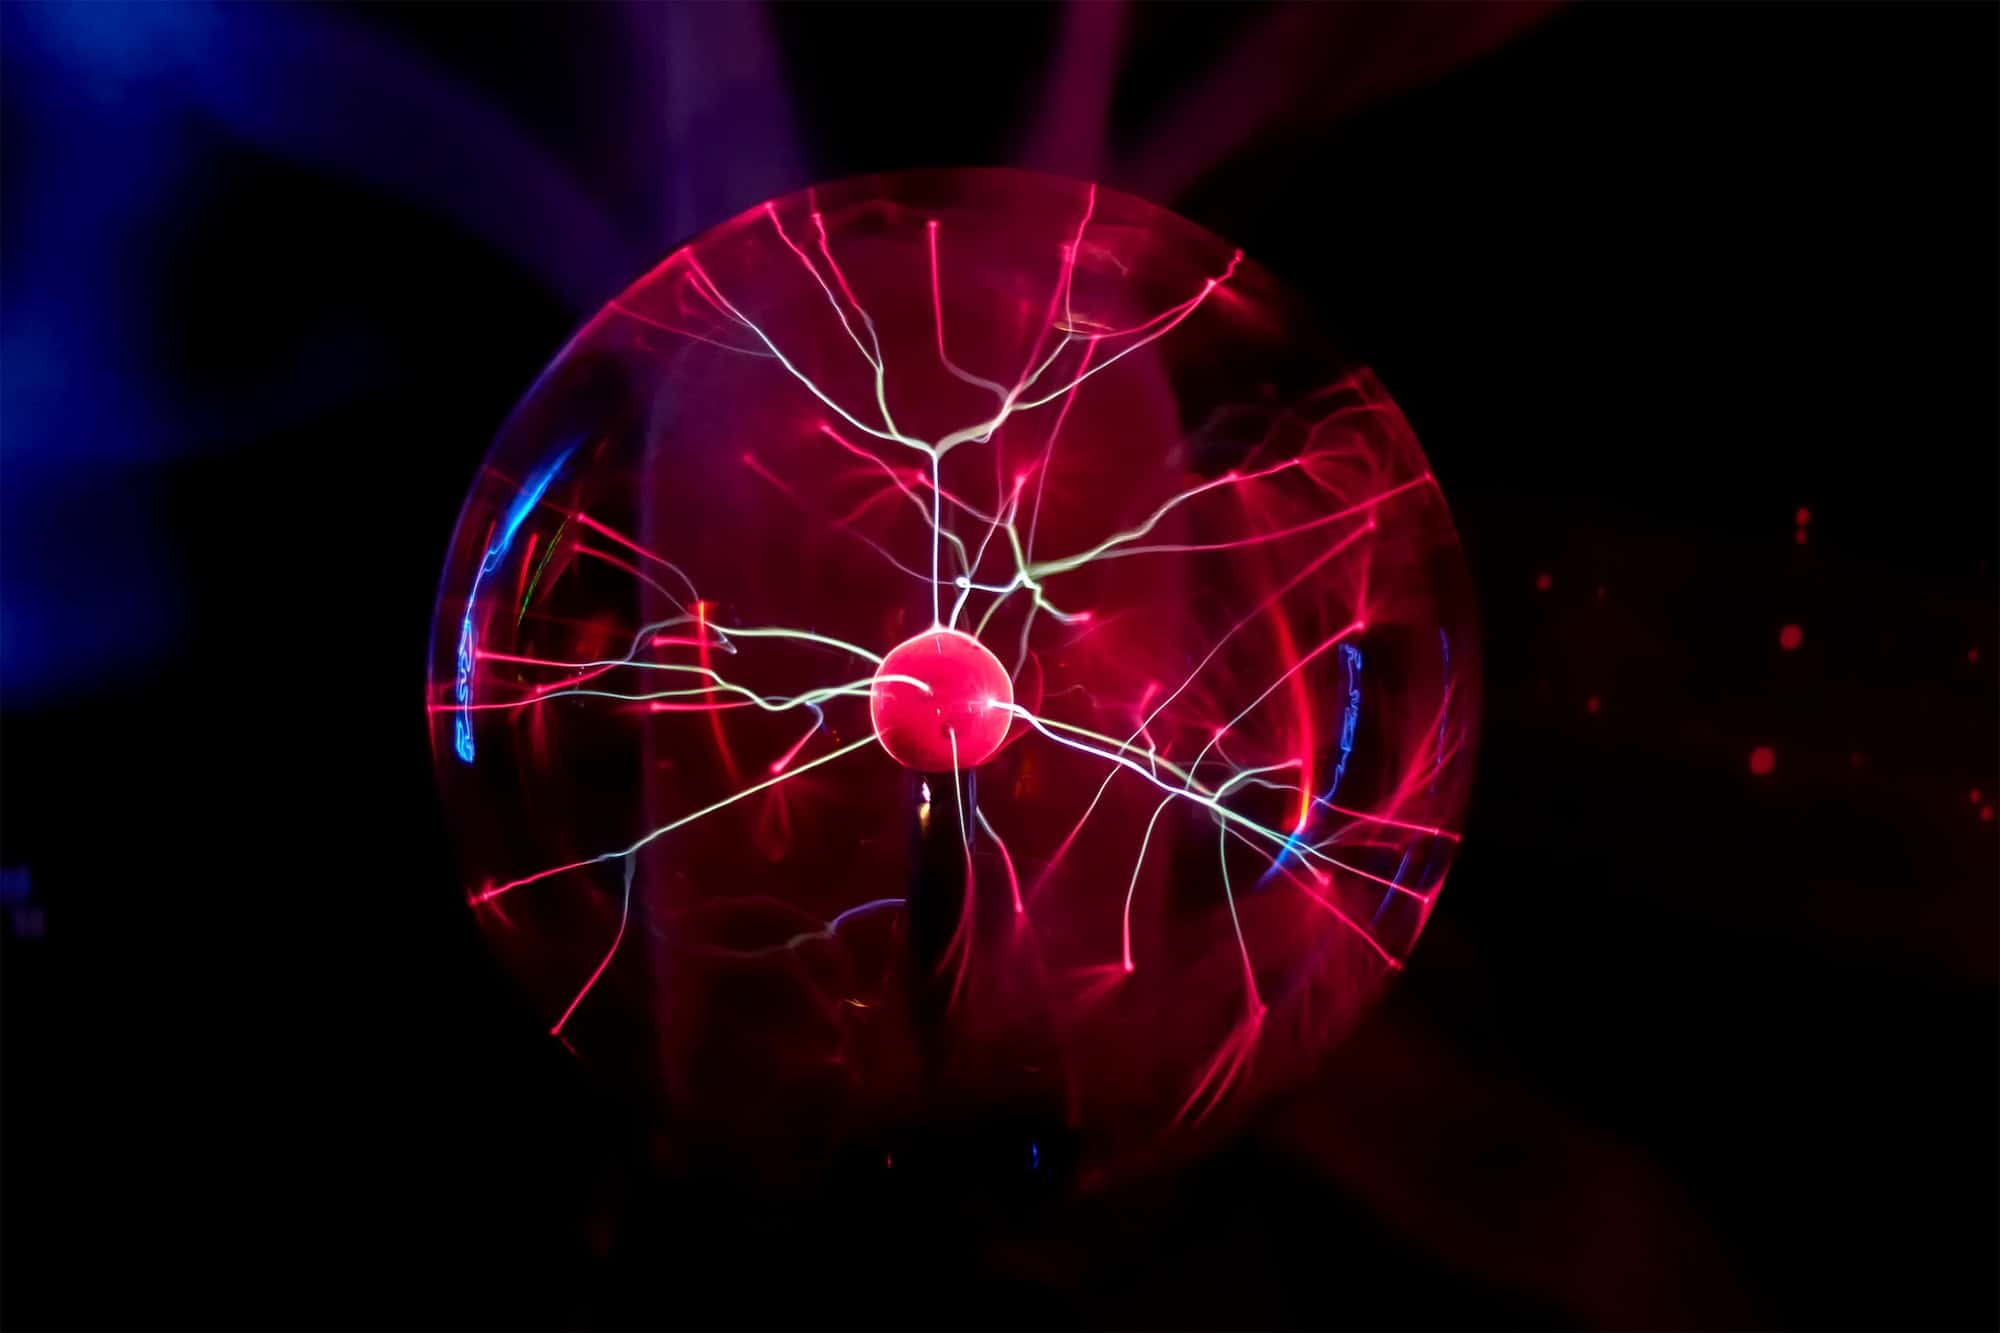 electric plasma ball on a dark background static electricity model